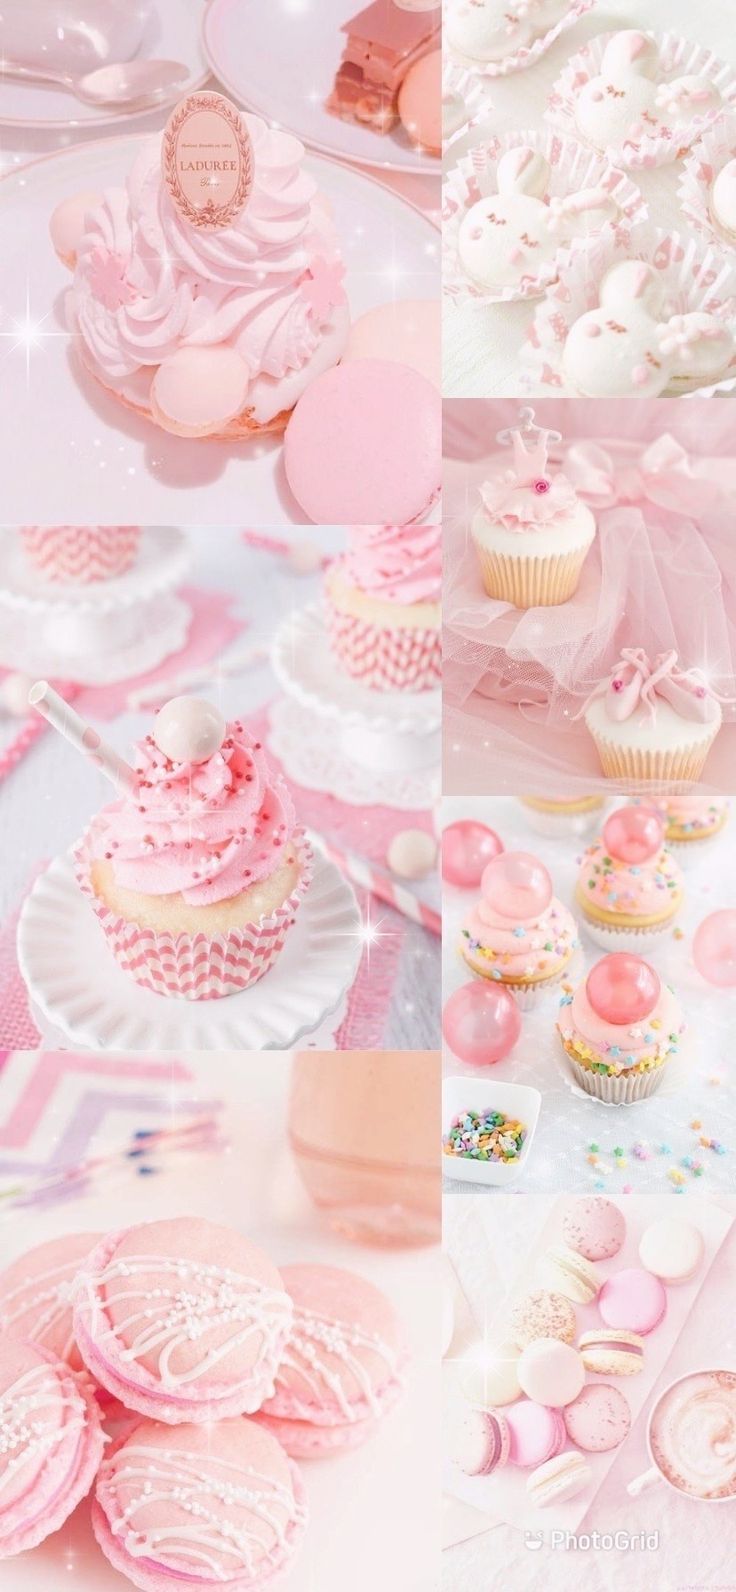 Collage of pink desserts including macarons, cupcakes, and donuts. - Cake